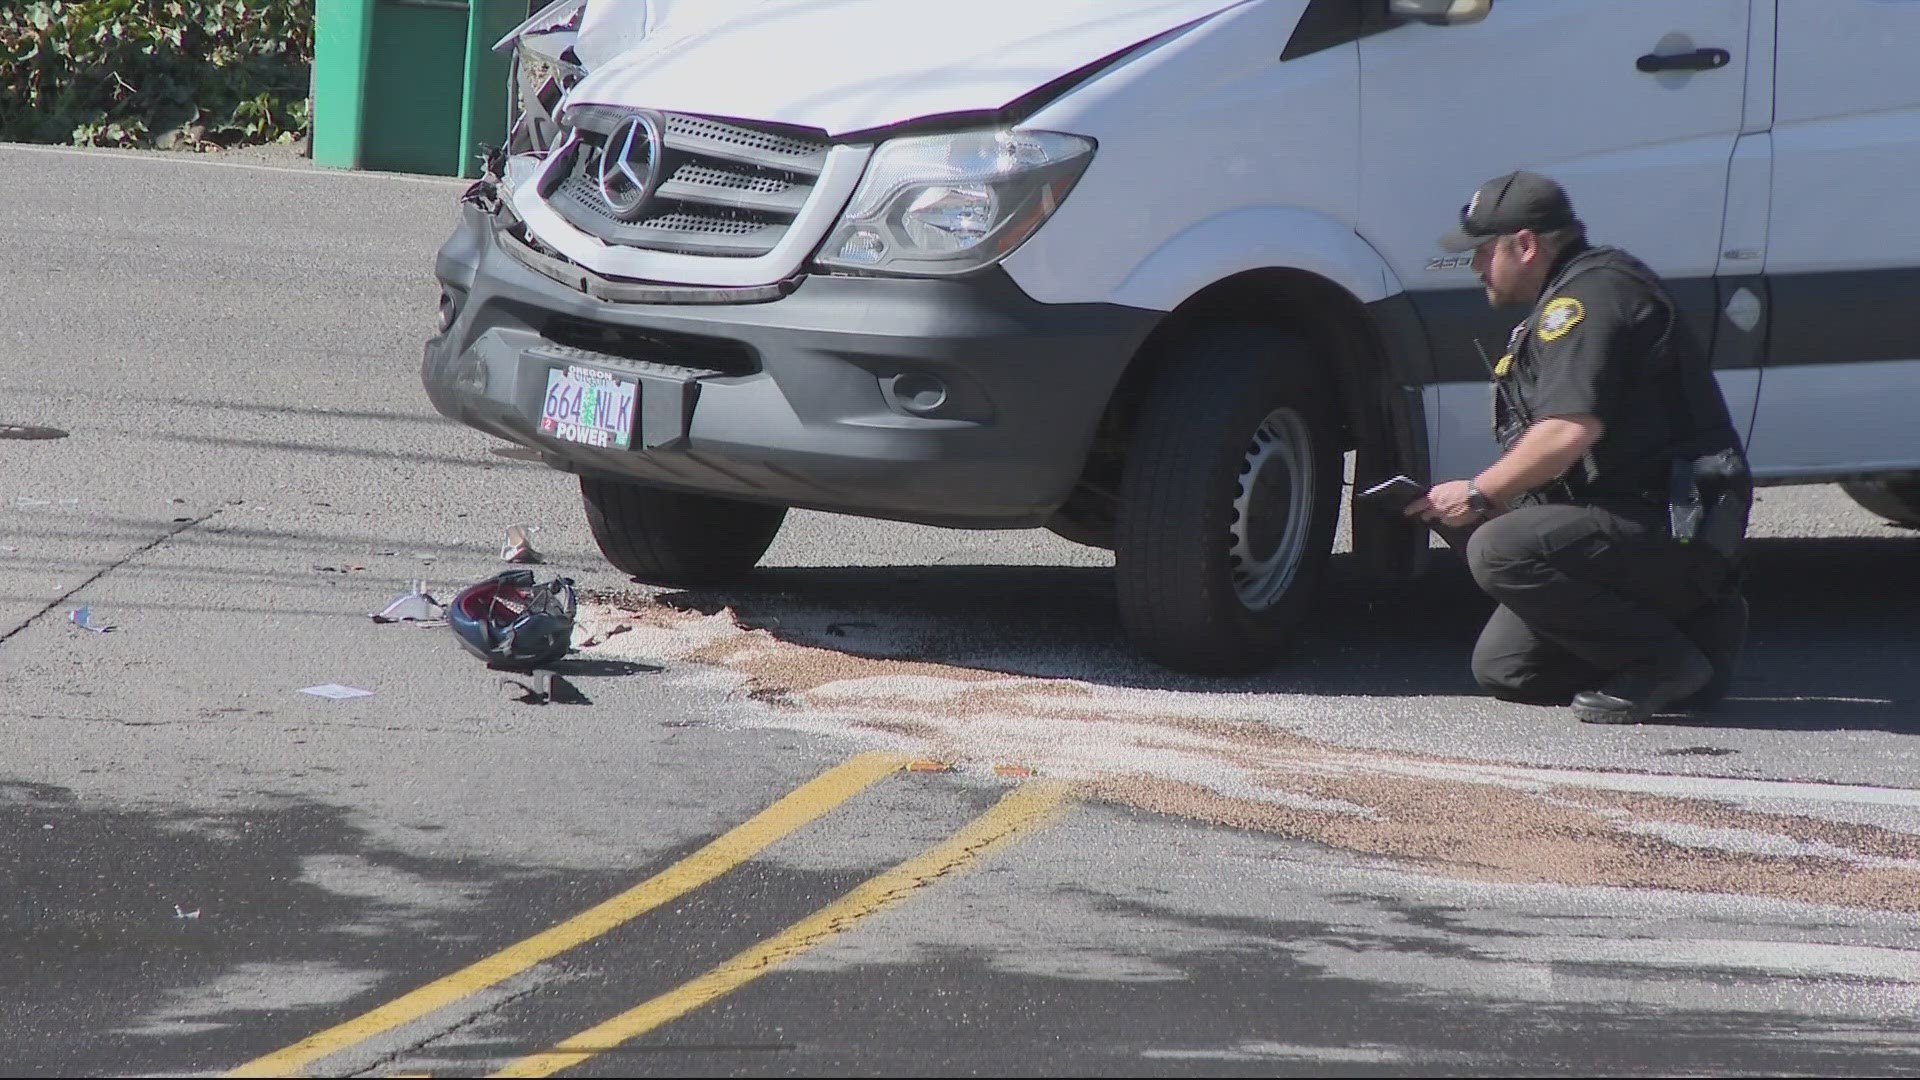 The collision left a cyclist with serious injuries and took place Monday morning on Southwest Bany and 185th in the Aloha area.